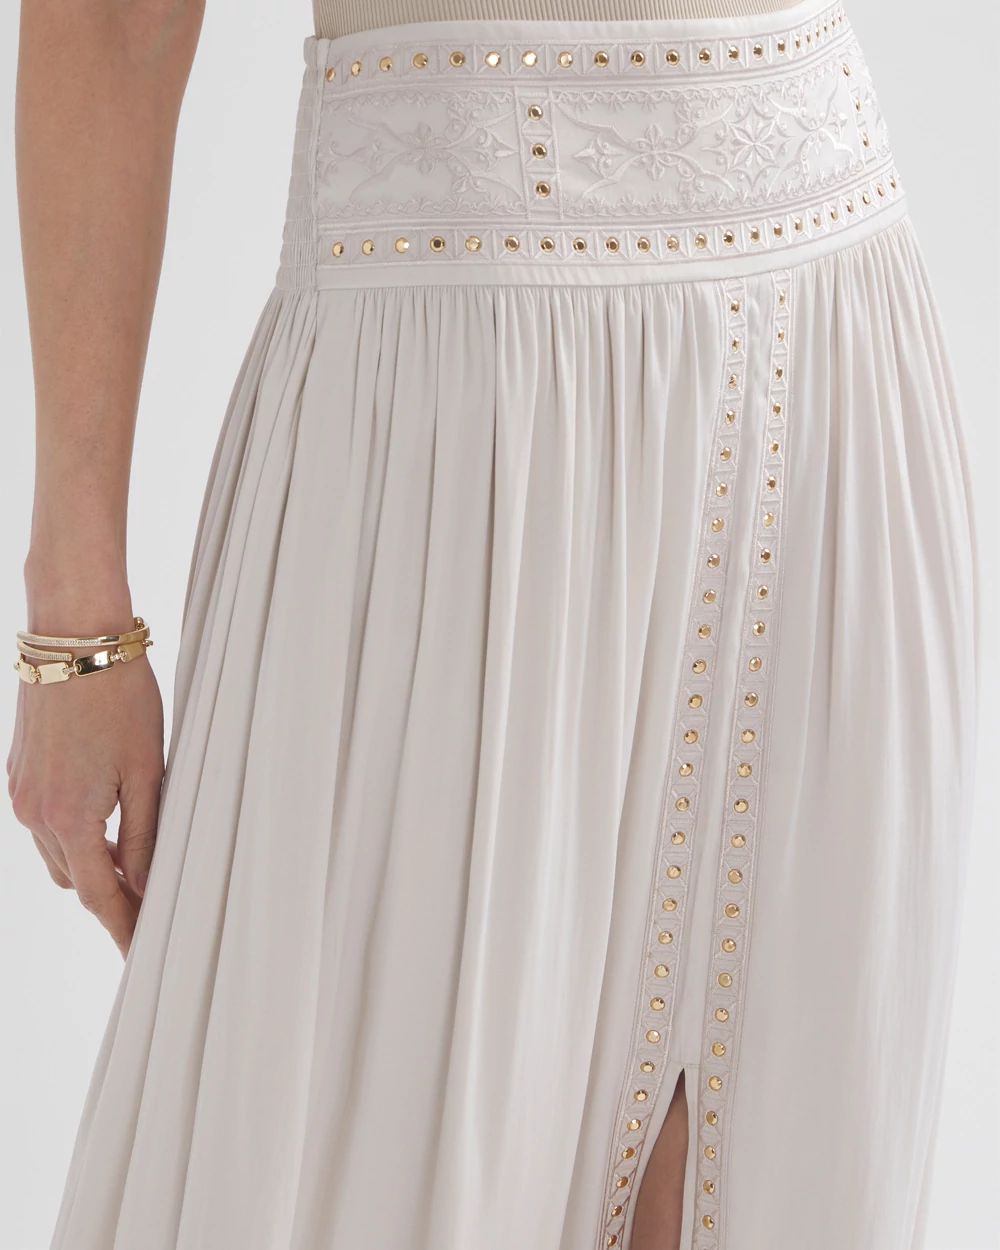 Studded Midi Skirt click to view larger image.